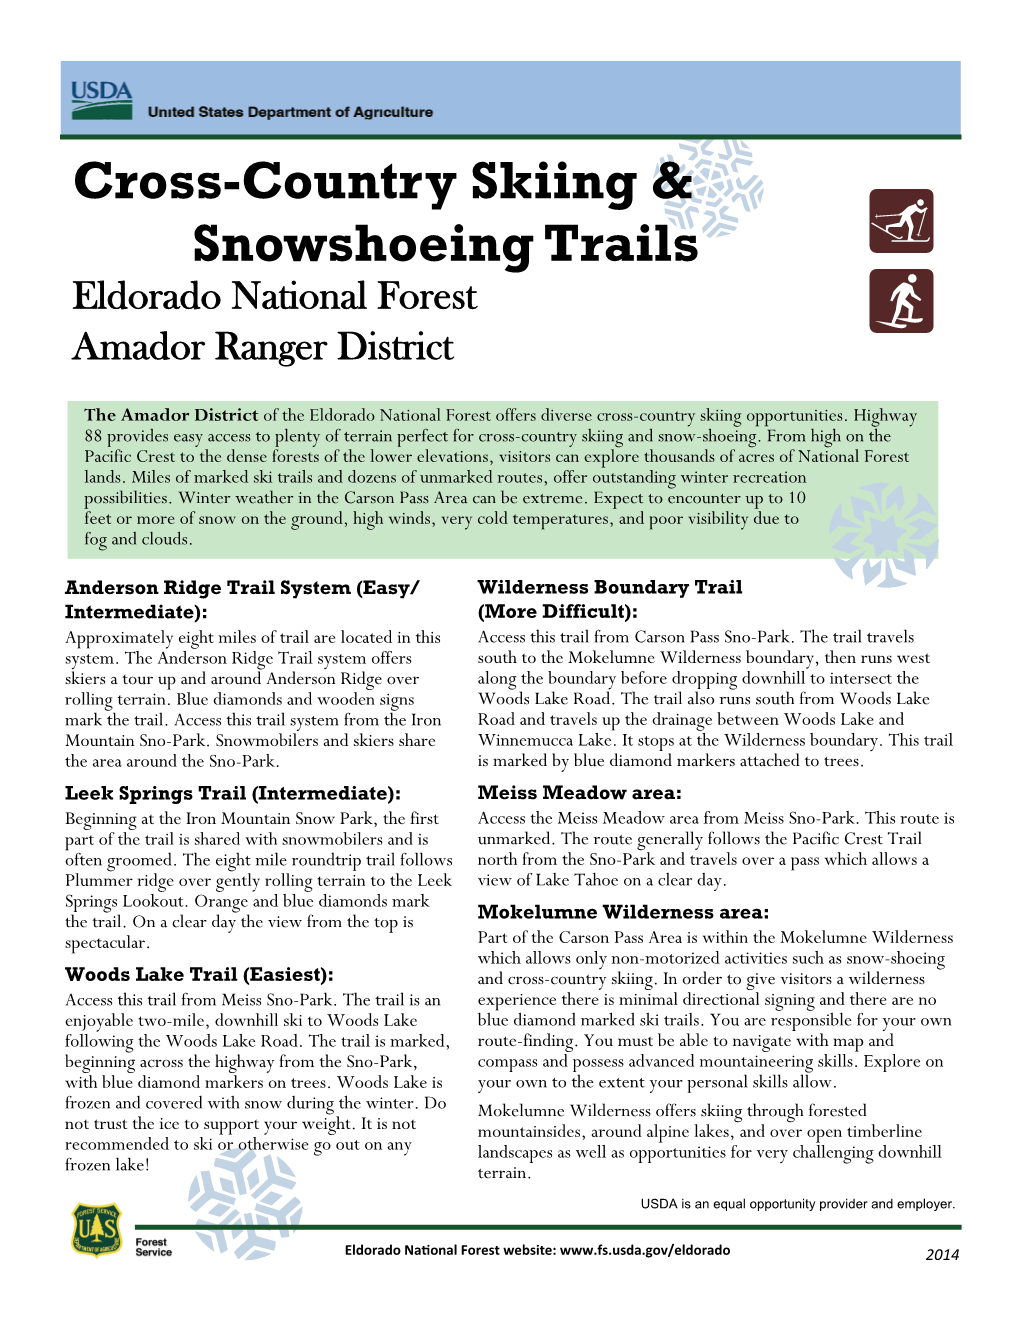 Cross-Country Skiing & Snowshoeing Trails